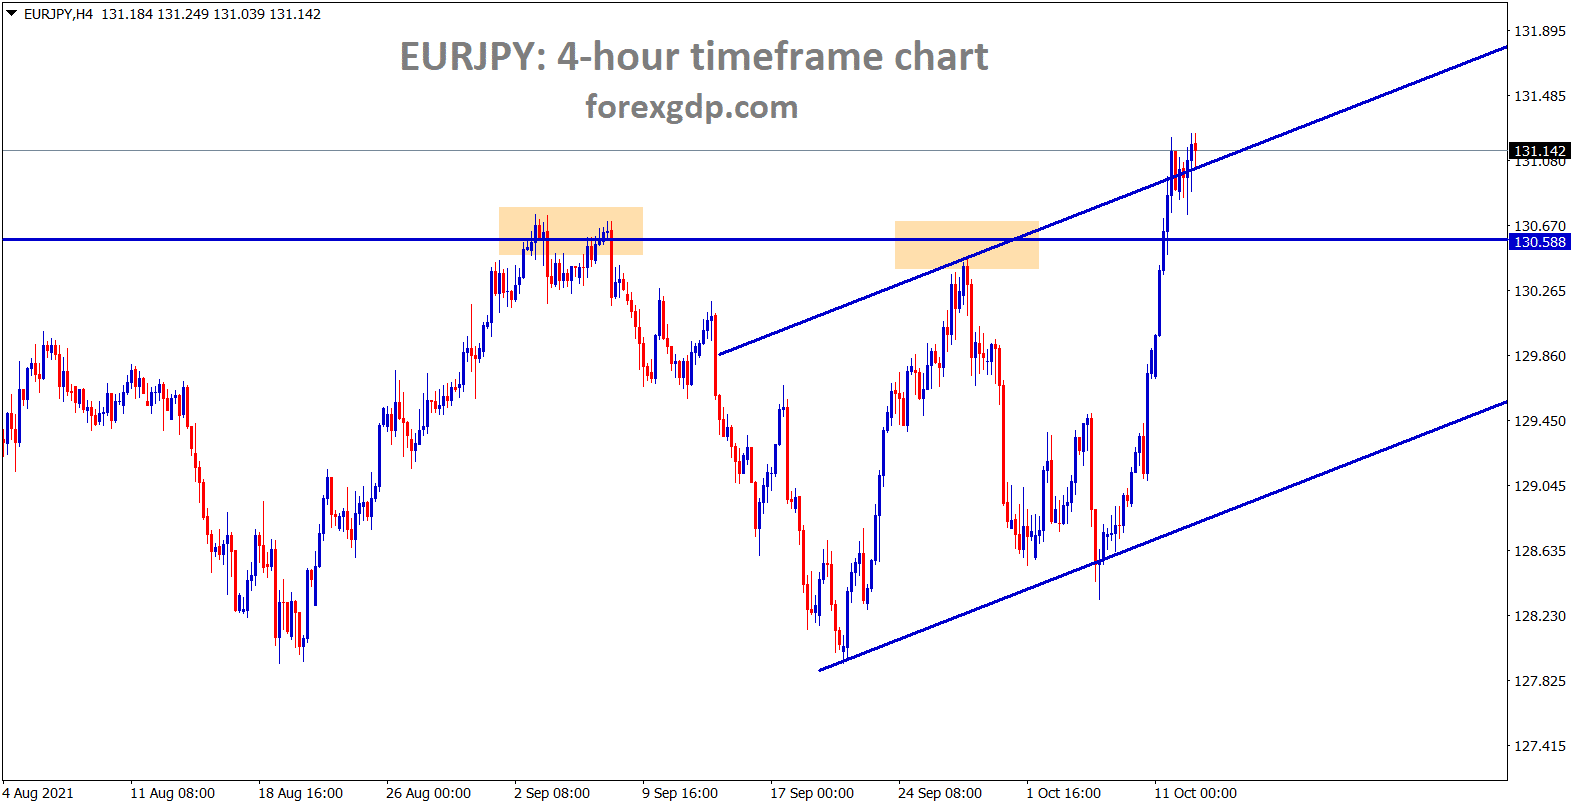 EURJPY is moving up continuously breaking the highs with buyers pressure